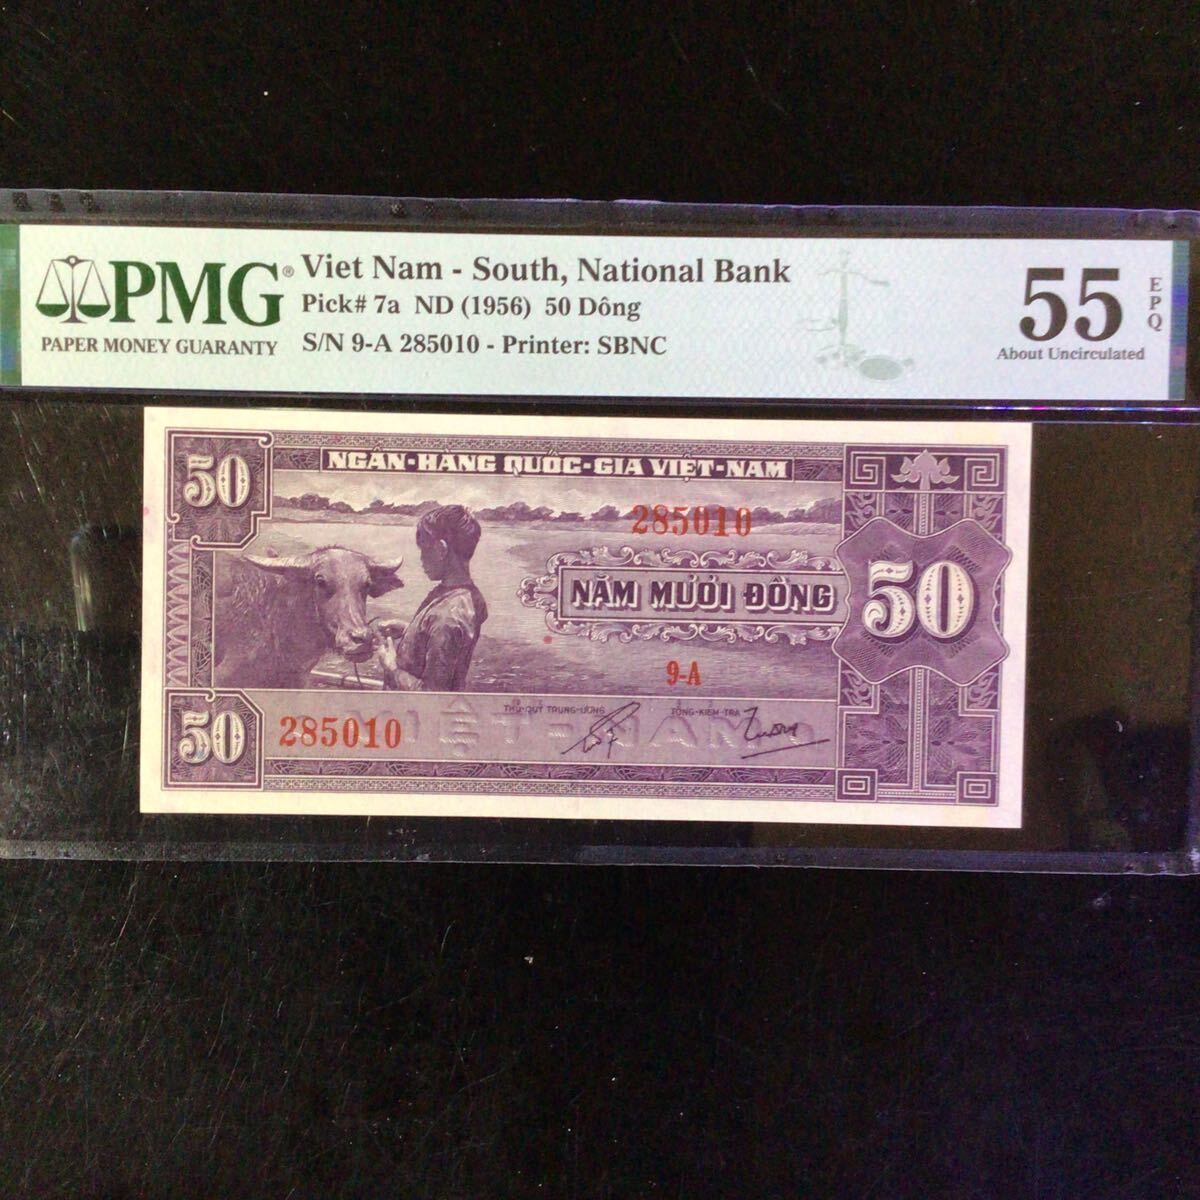 World Banknote Grading SOUTH VIET NAM《National Bank》50 Dong【1956】『PMG Grading About Uncirculated 55 EPQ』の画像1